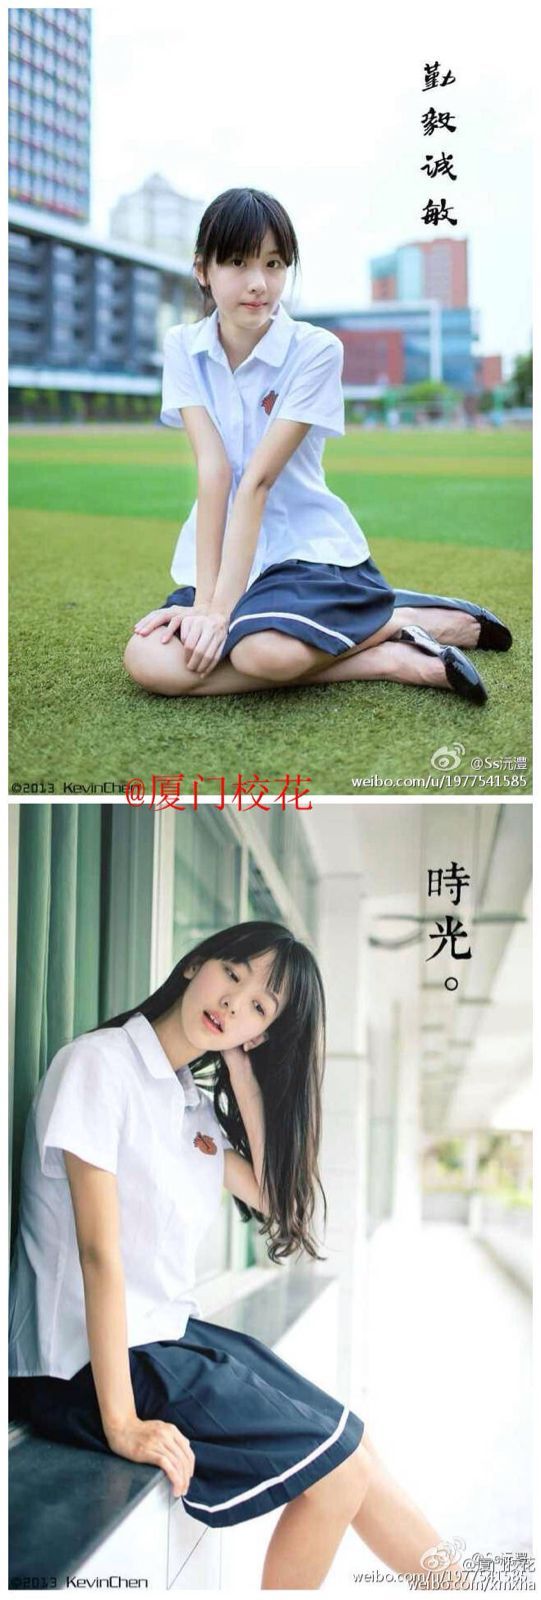 Duling Chen Sexy and Hottest Photos , Latest Pics